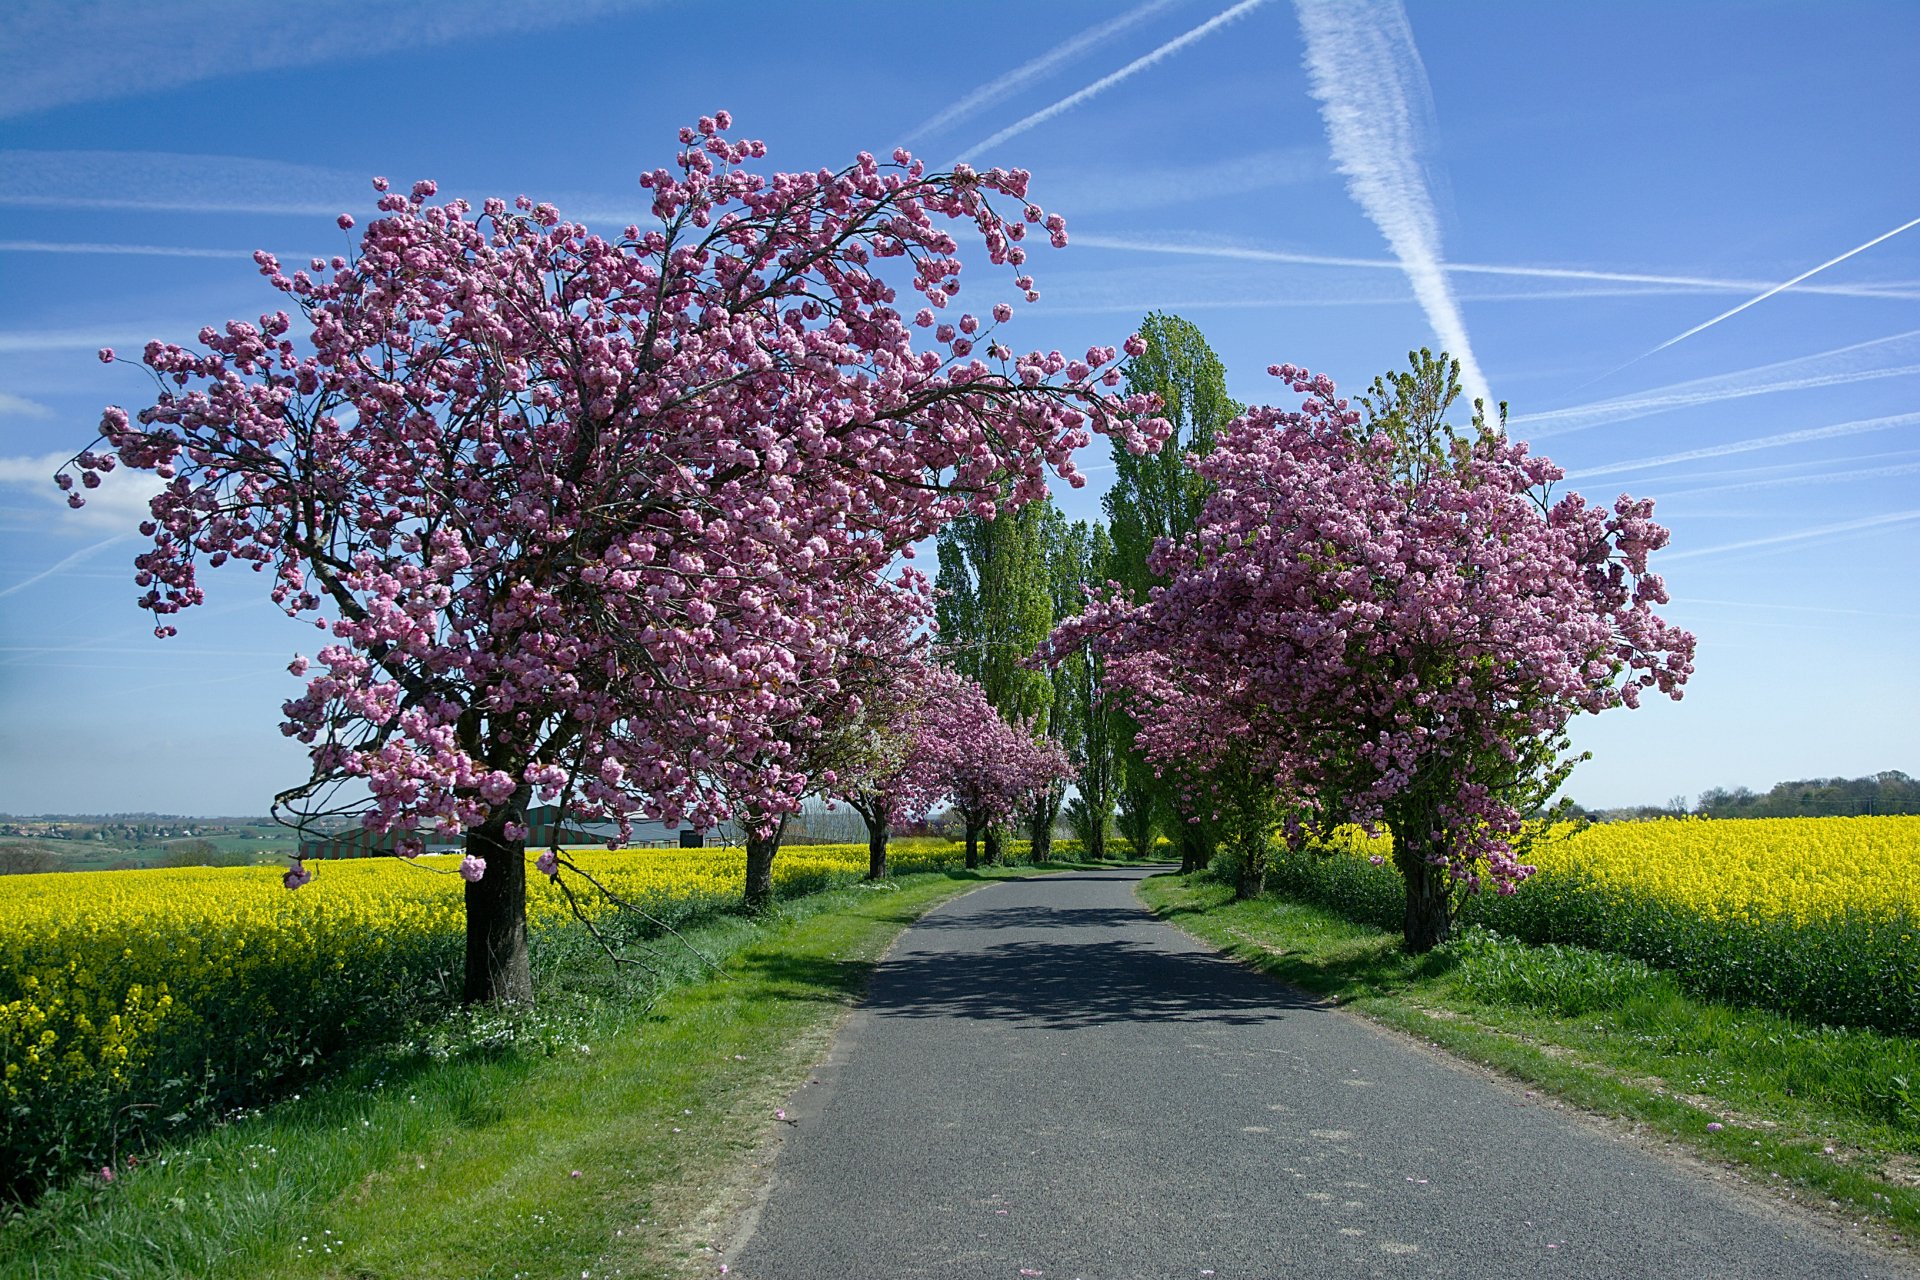  Country  Road  in Spring  HD Wallpaper  Background  Image 